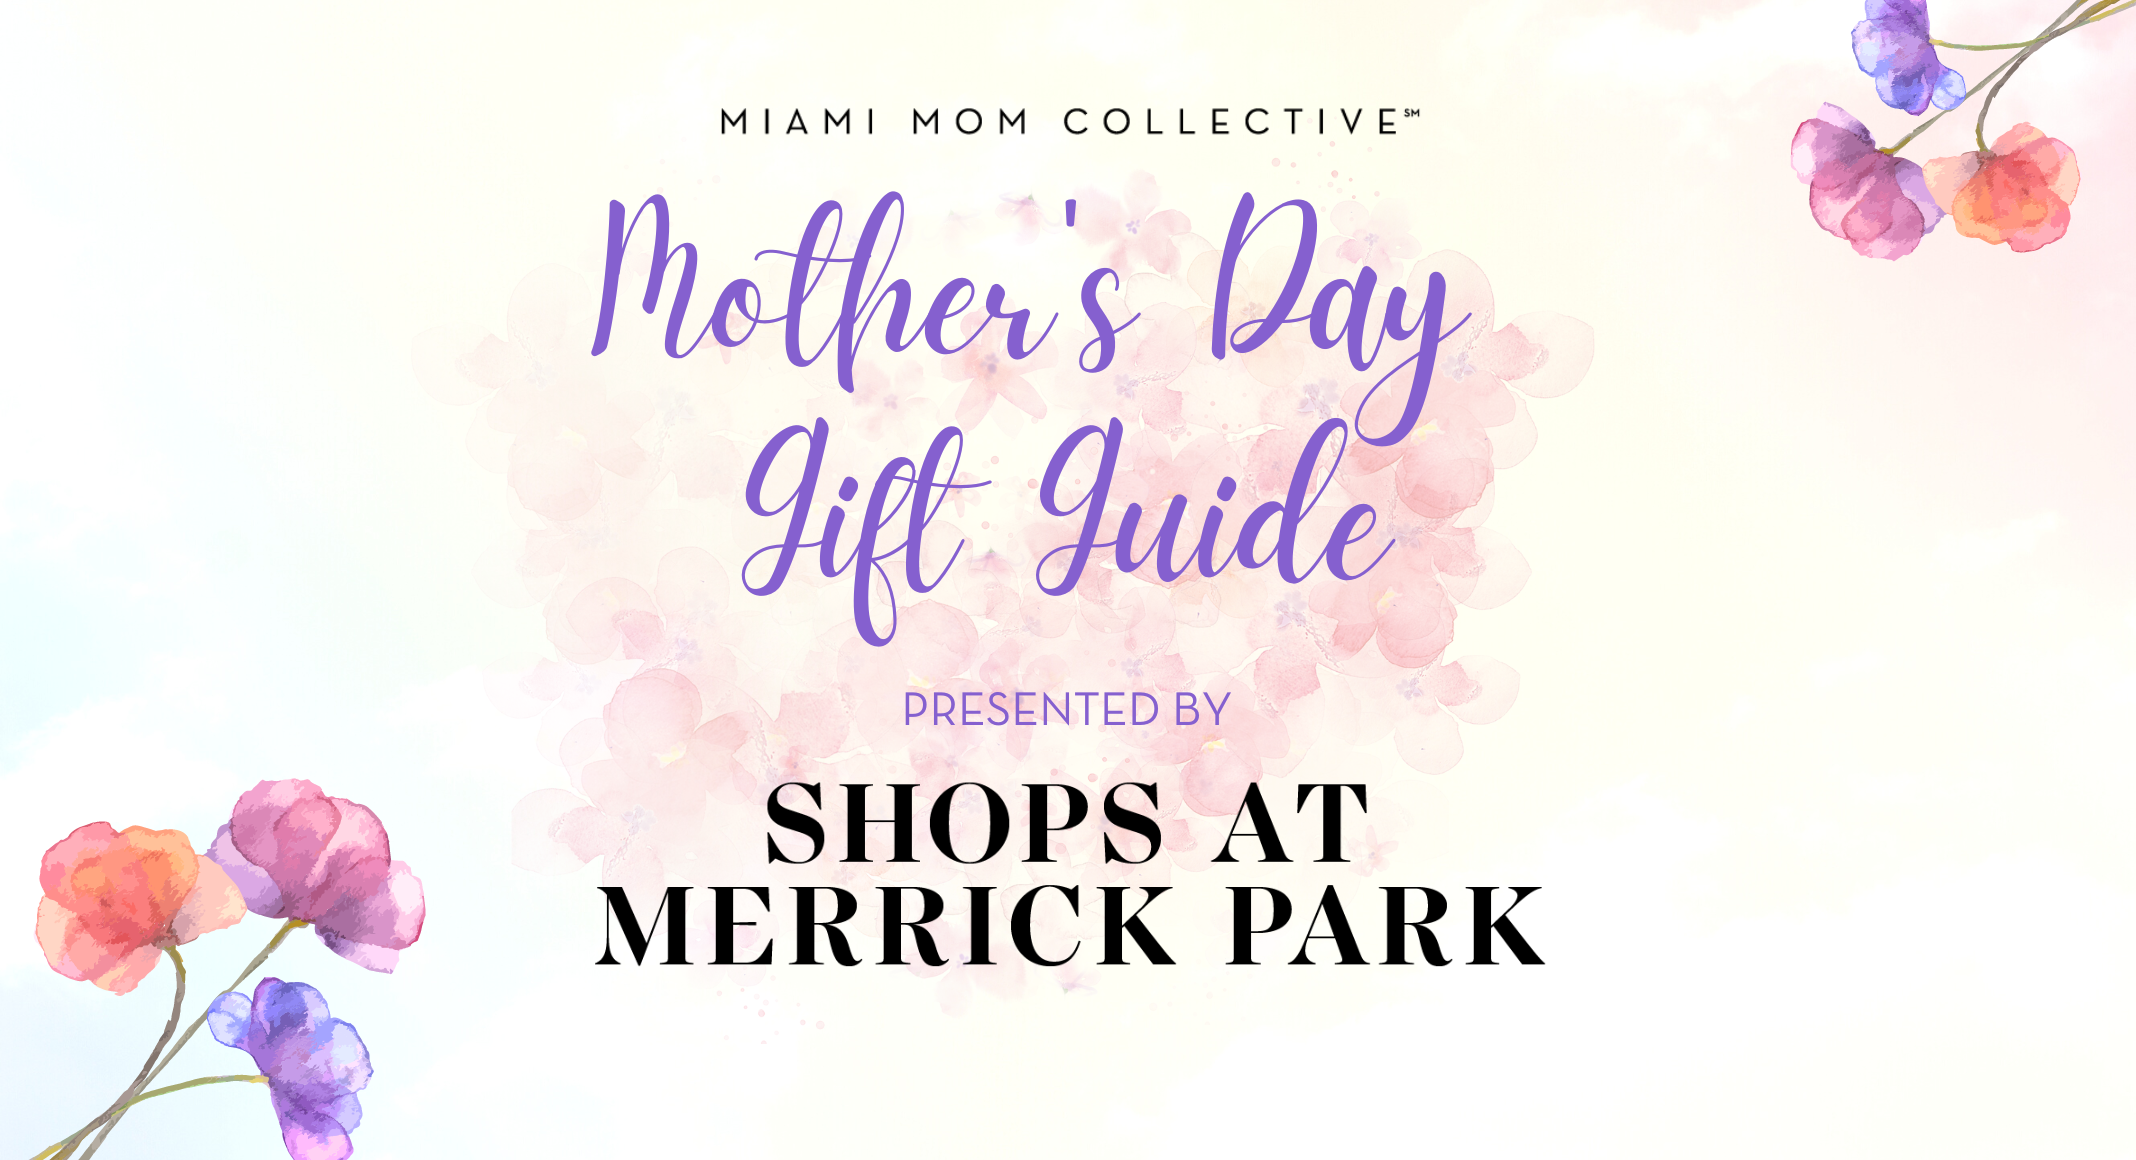 https://miami.momcollective.com/wp-content/uploads/2023/04/Mothers-Day-Gift-Guide-1068-%C3%97-580-px.png